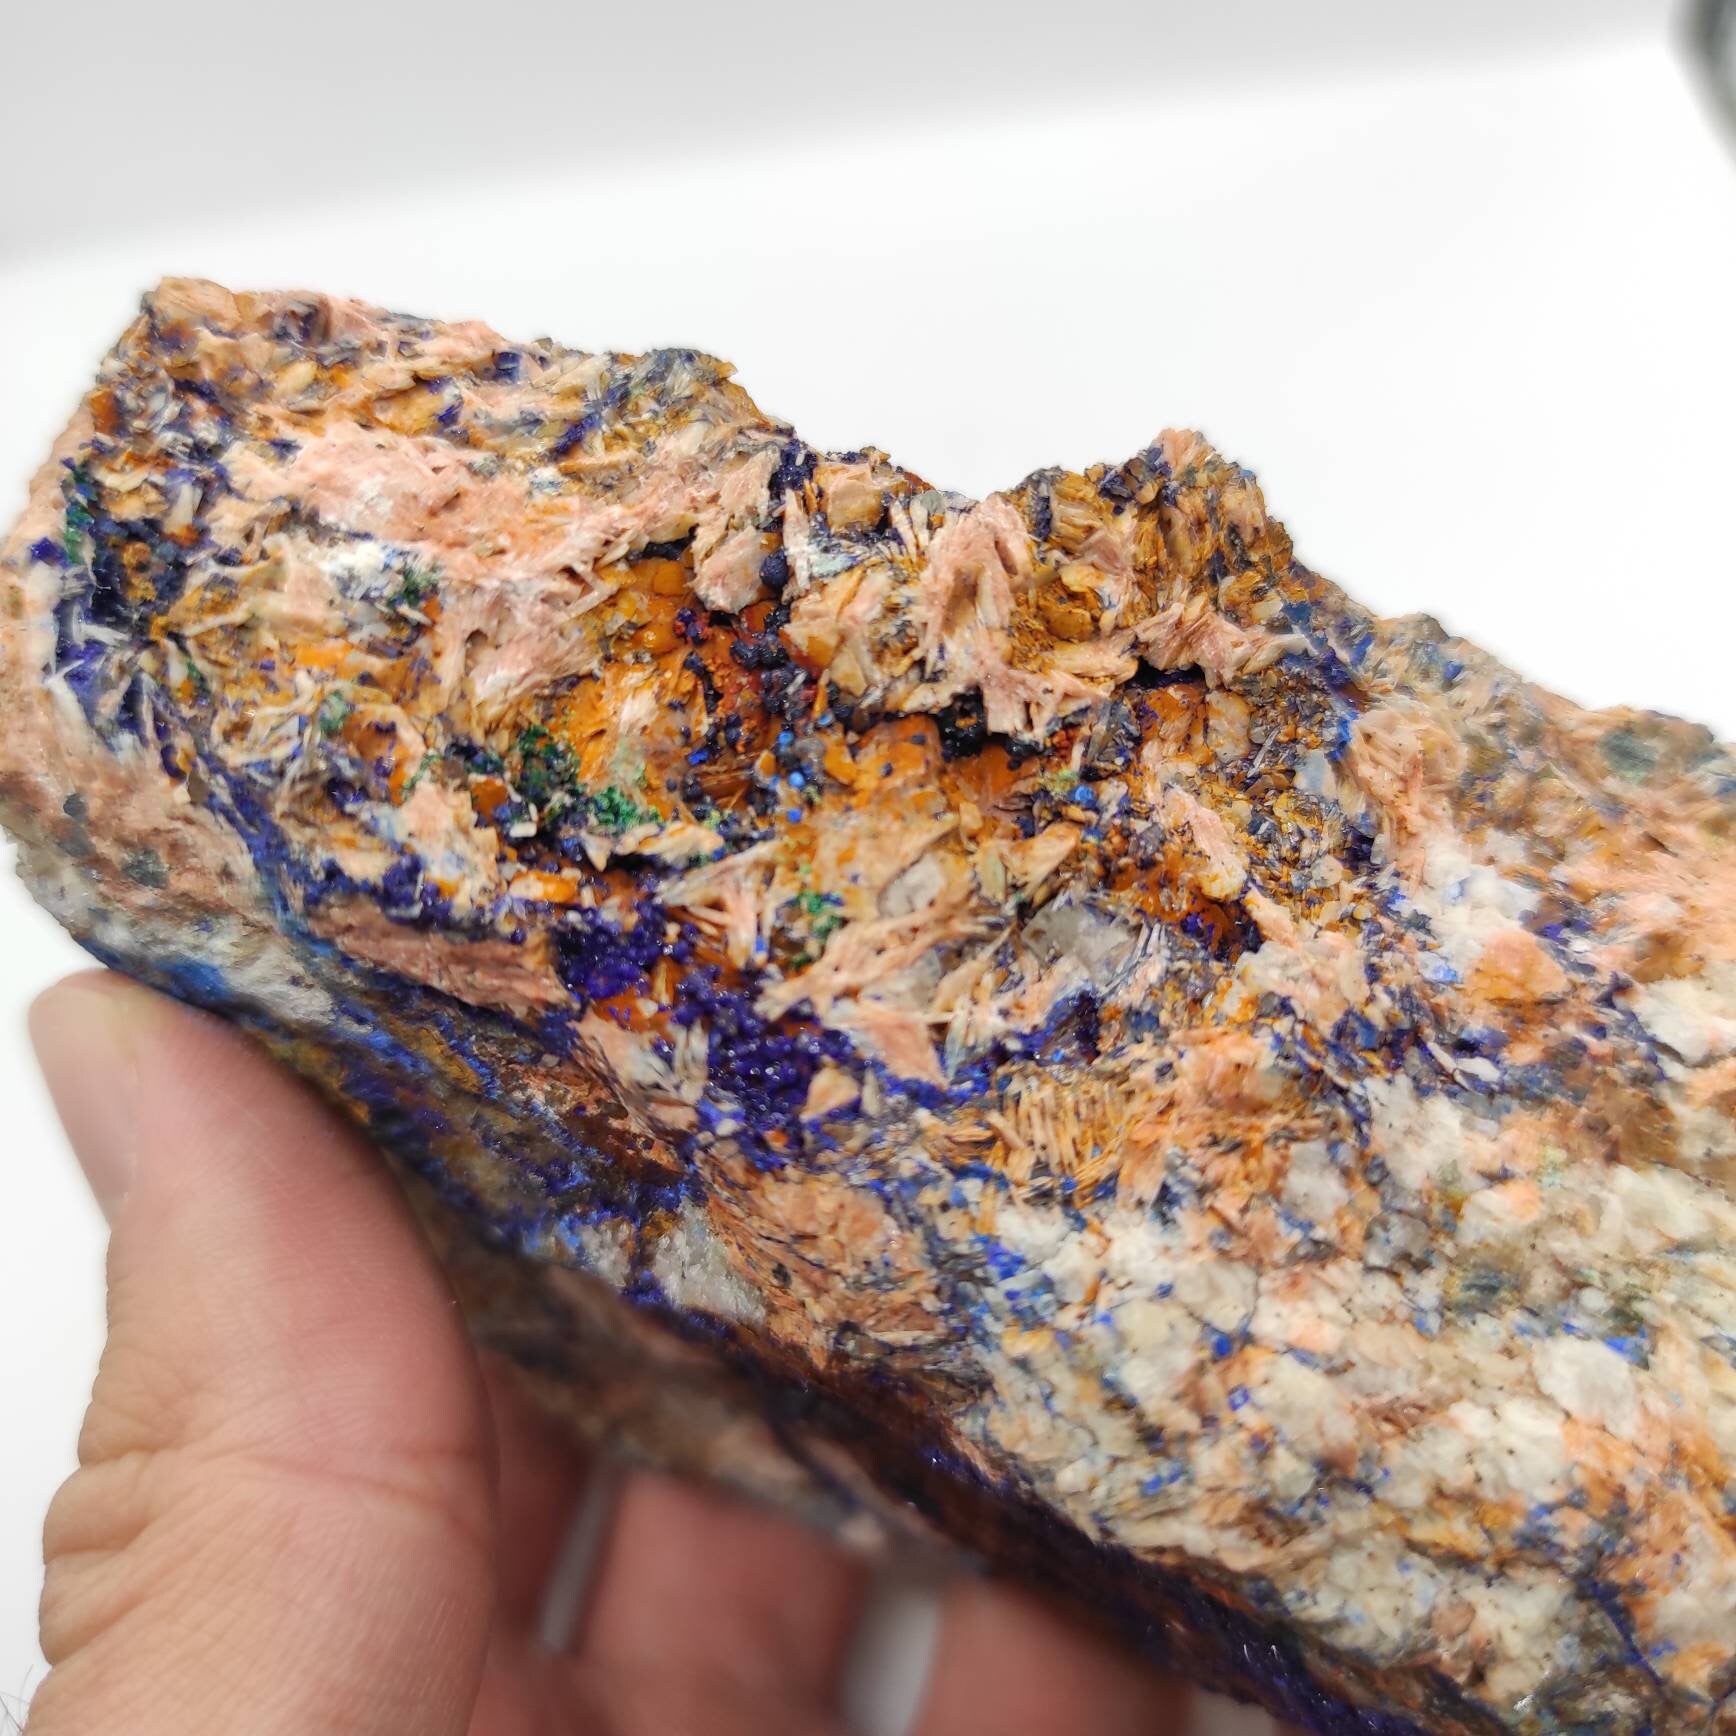 486g - Large Azurite Crystal Specimen - Blue Azurite from Sidi Ayad, Morocco - Natural Raw Azurite Mineral - Rough Azurite Healing Crystal